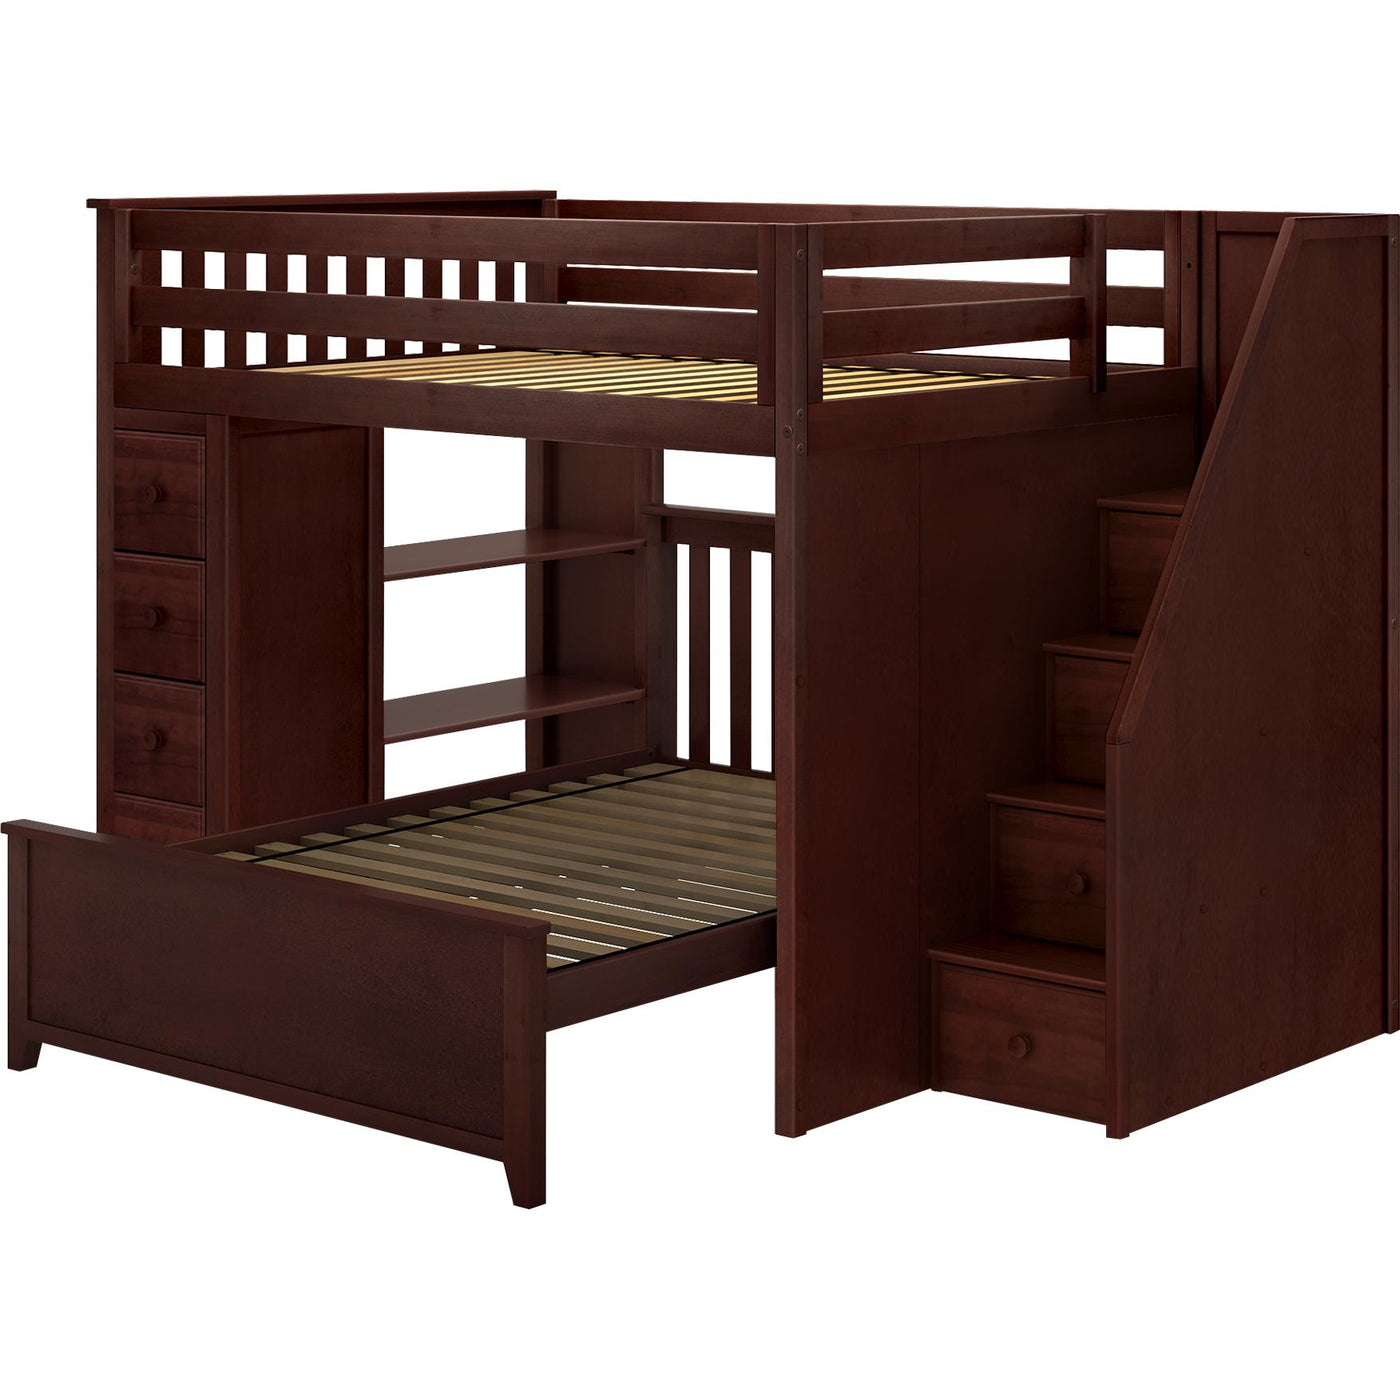 Jackpot Deluxe "CHELTENHAM 1" Full over Full L-shape Bunk with Staircase + Storage